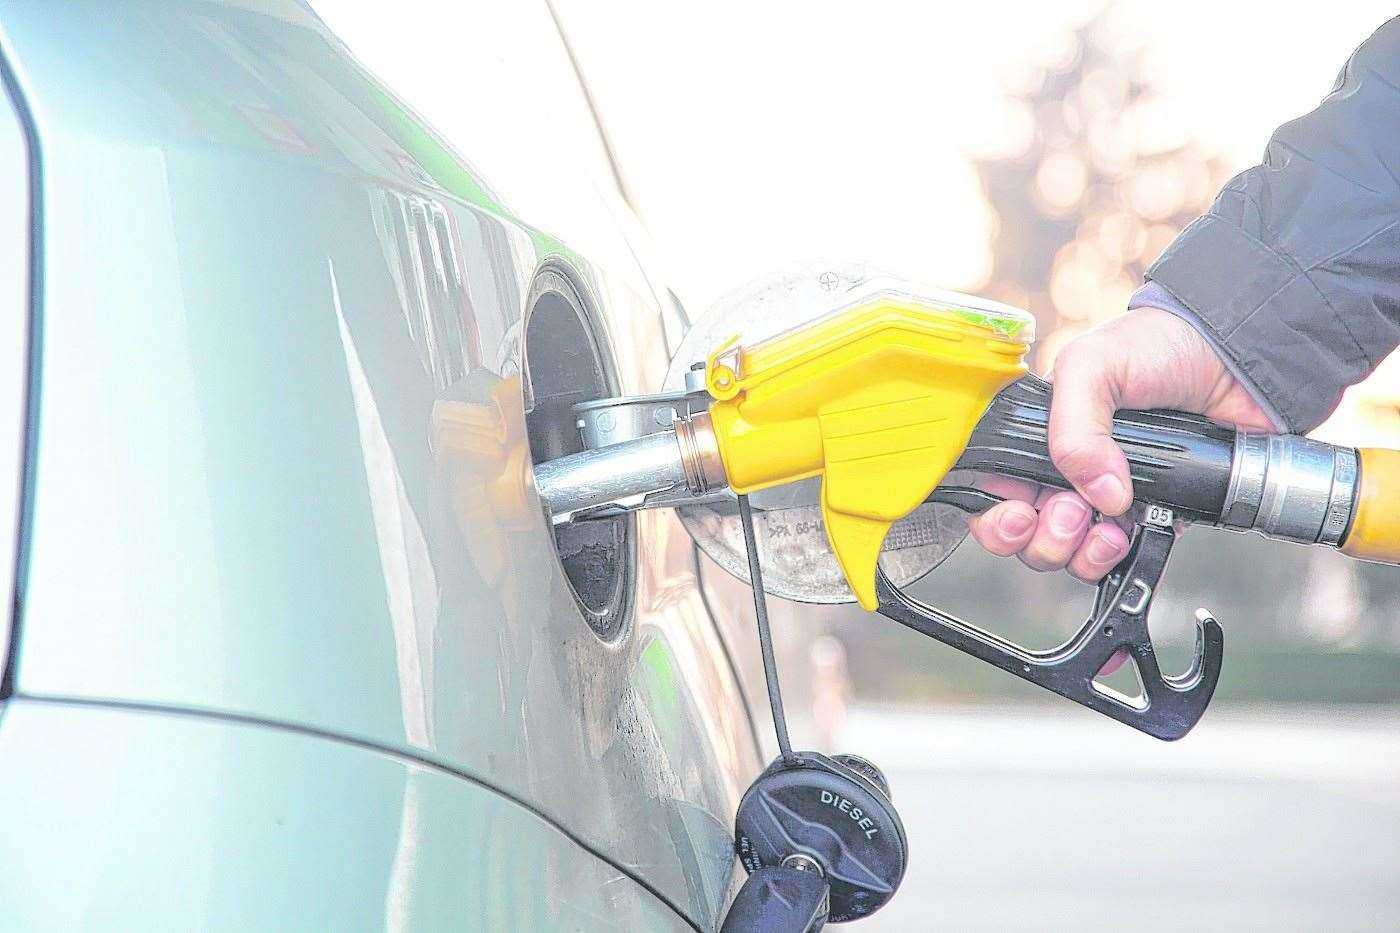 The cost of banning petrol and diesel cars could cost the average household more than £14,000 says a new report studying the policy